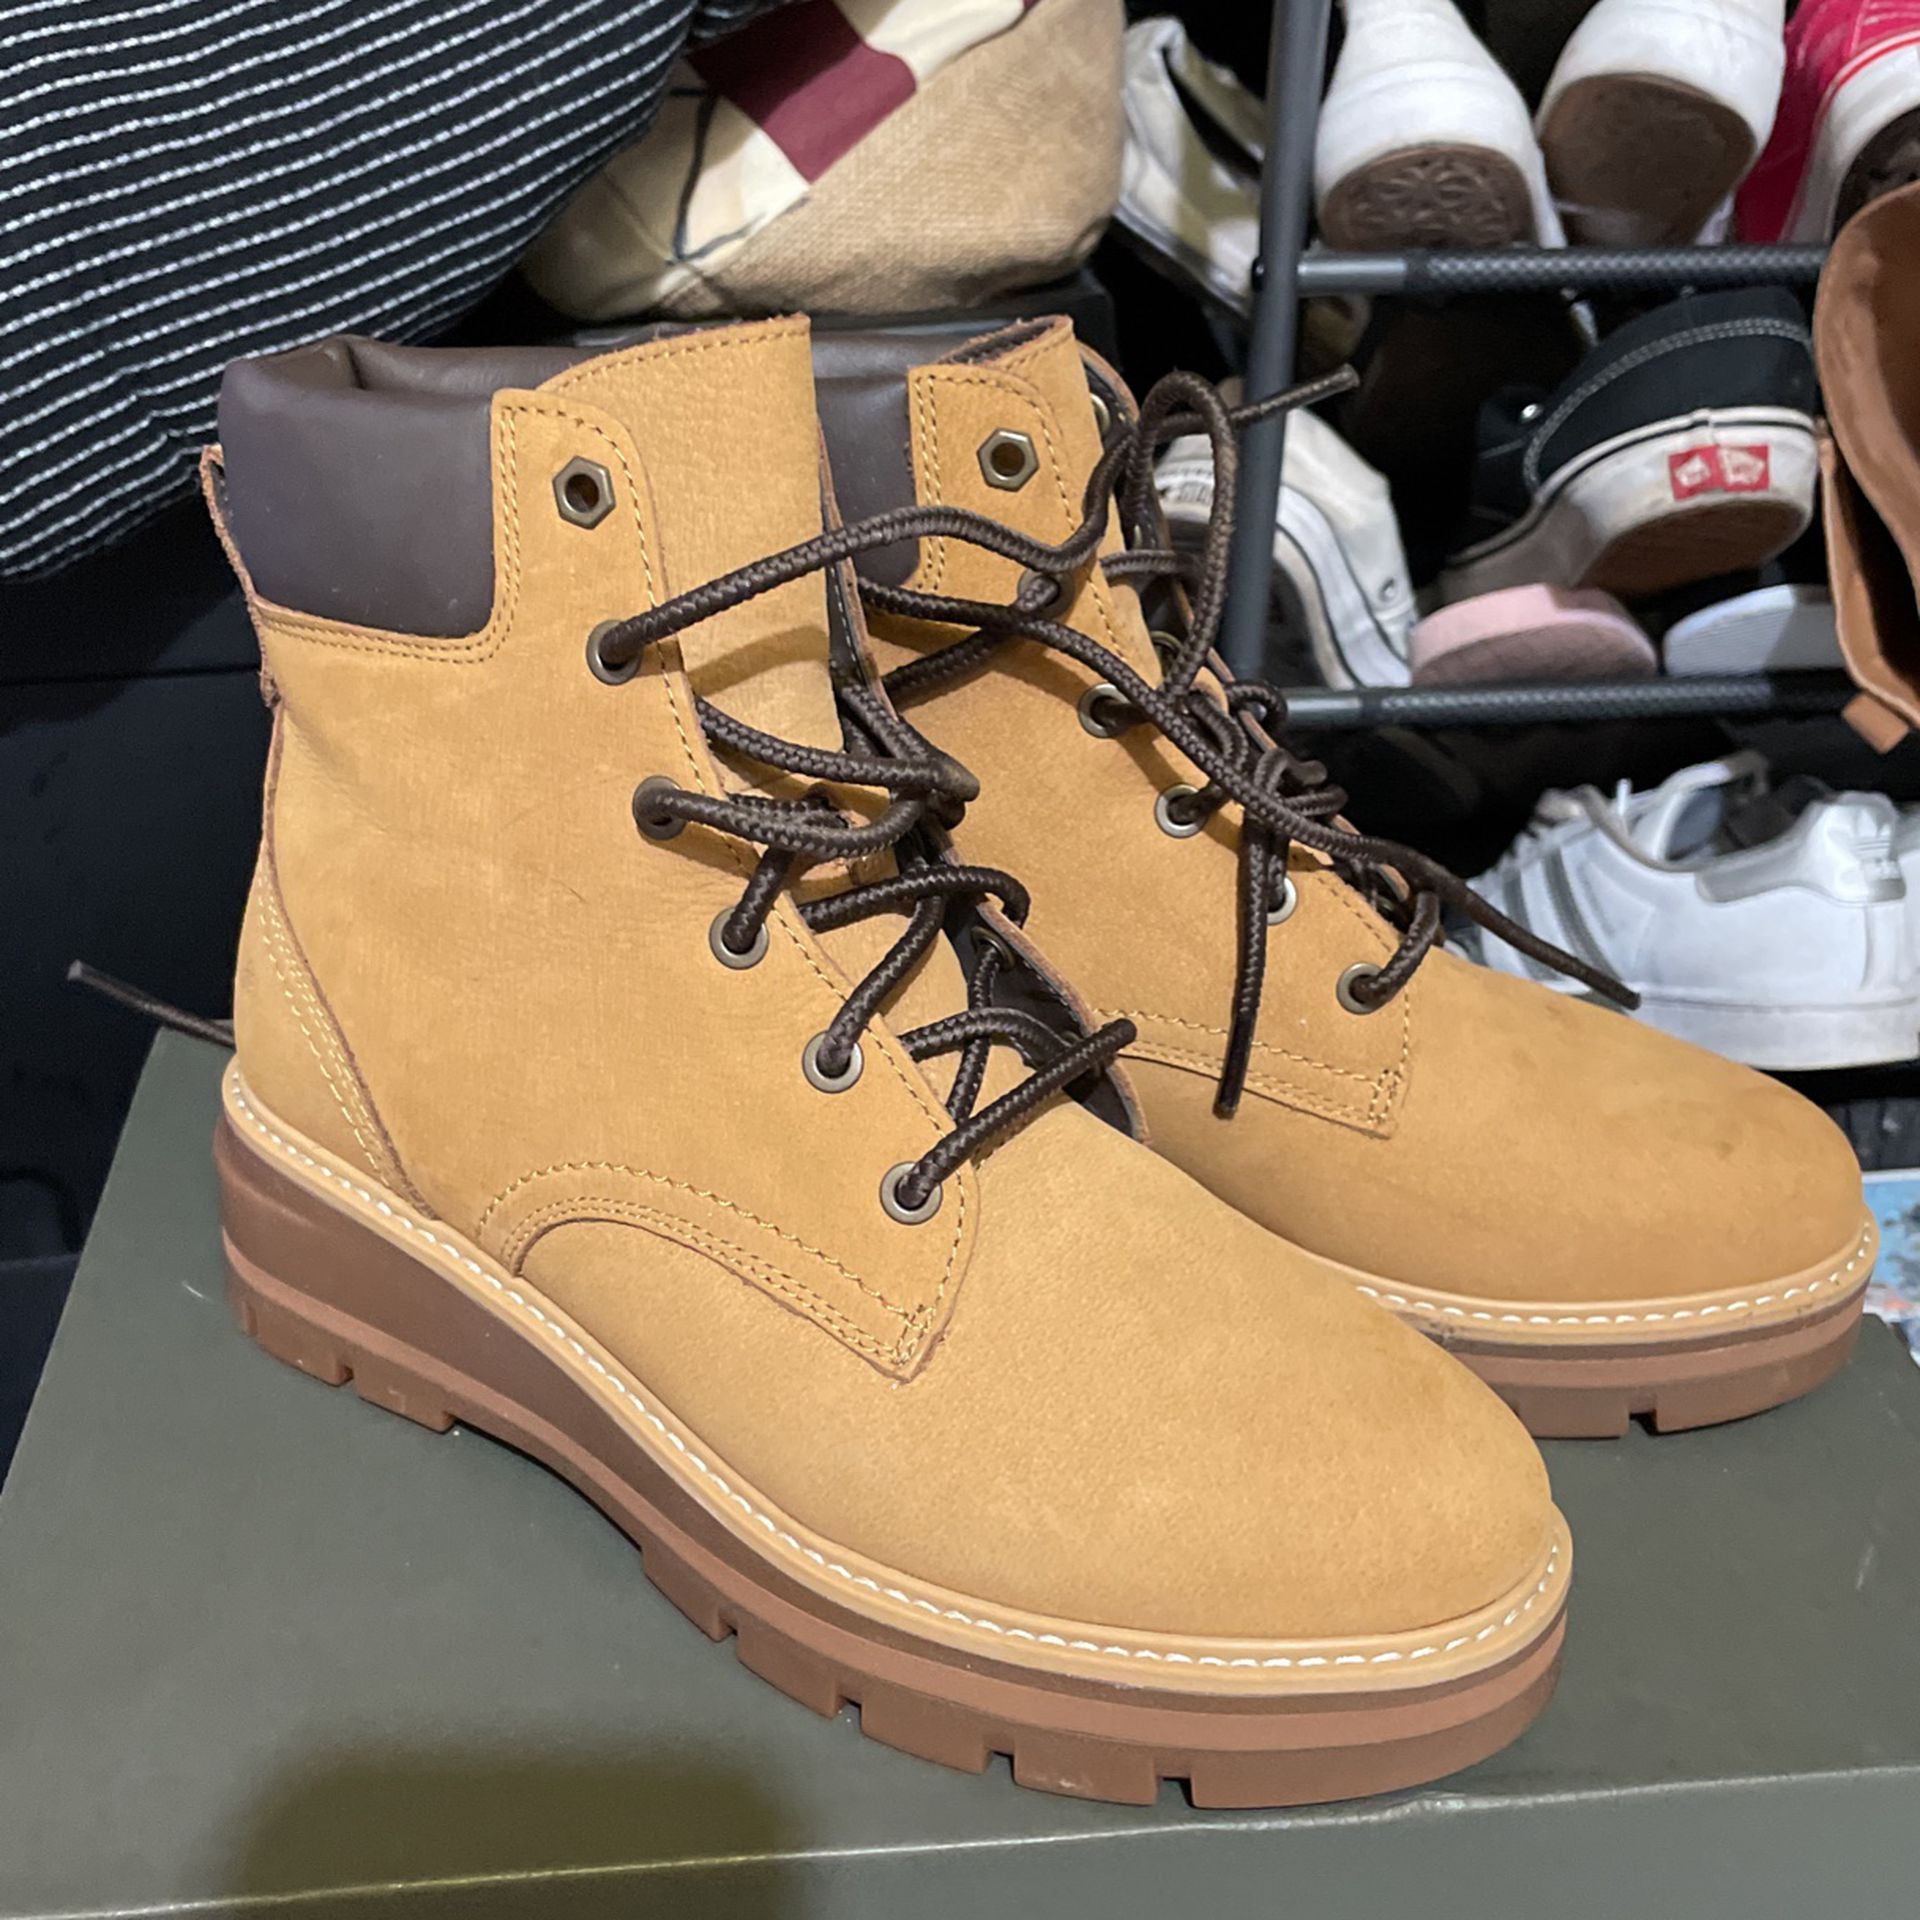 New Cheyenne Timberland Boots for in WA OfferUp